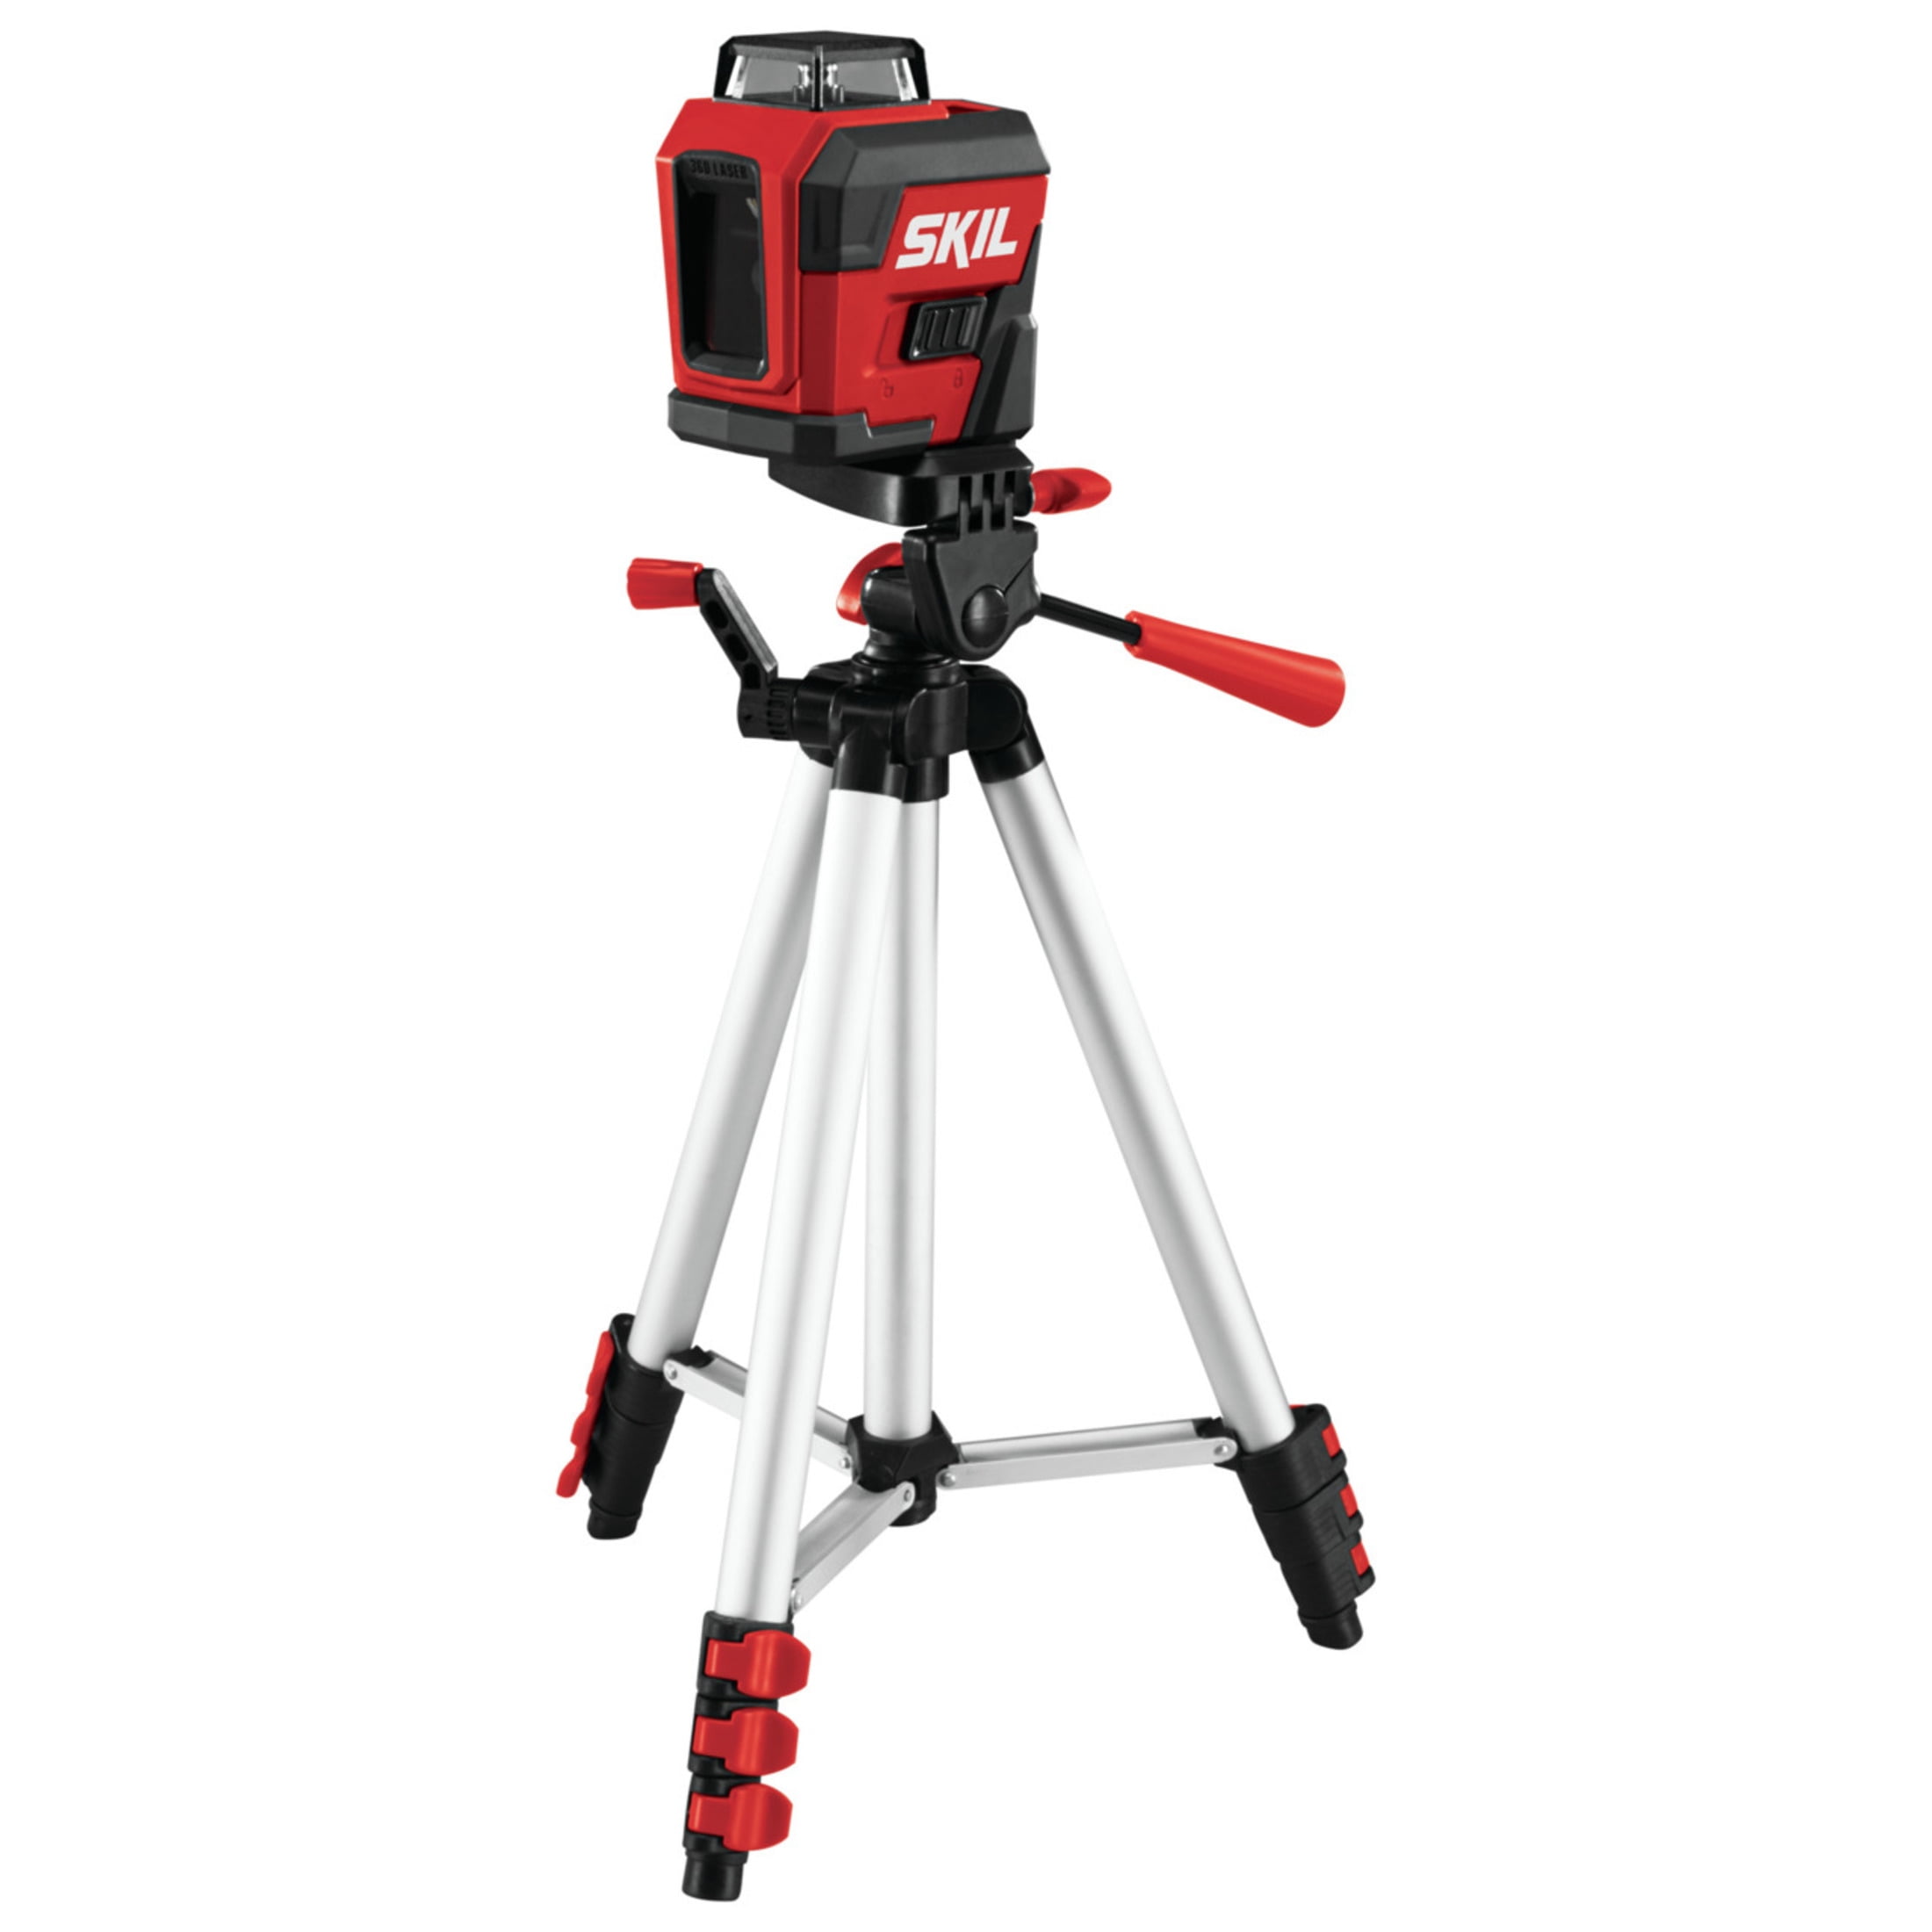 ROTATING LASER AUTO LEVEL PLUMB TOOL WITH TRIPOD STAND SURVEYING LEVELING LAZER 